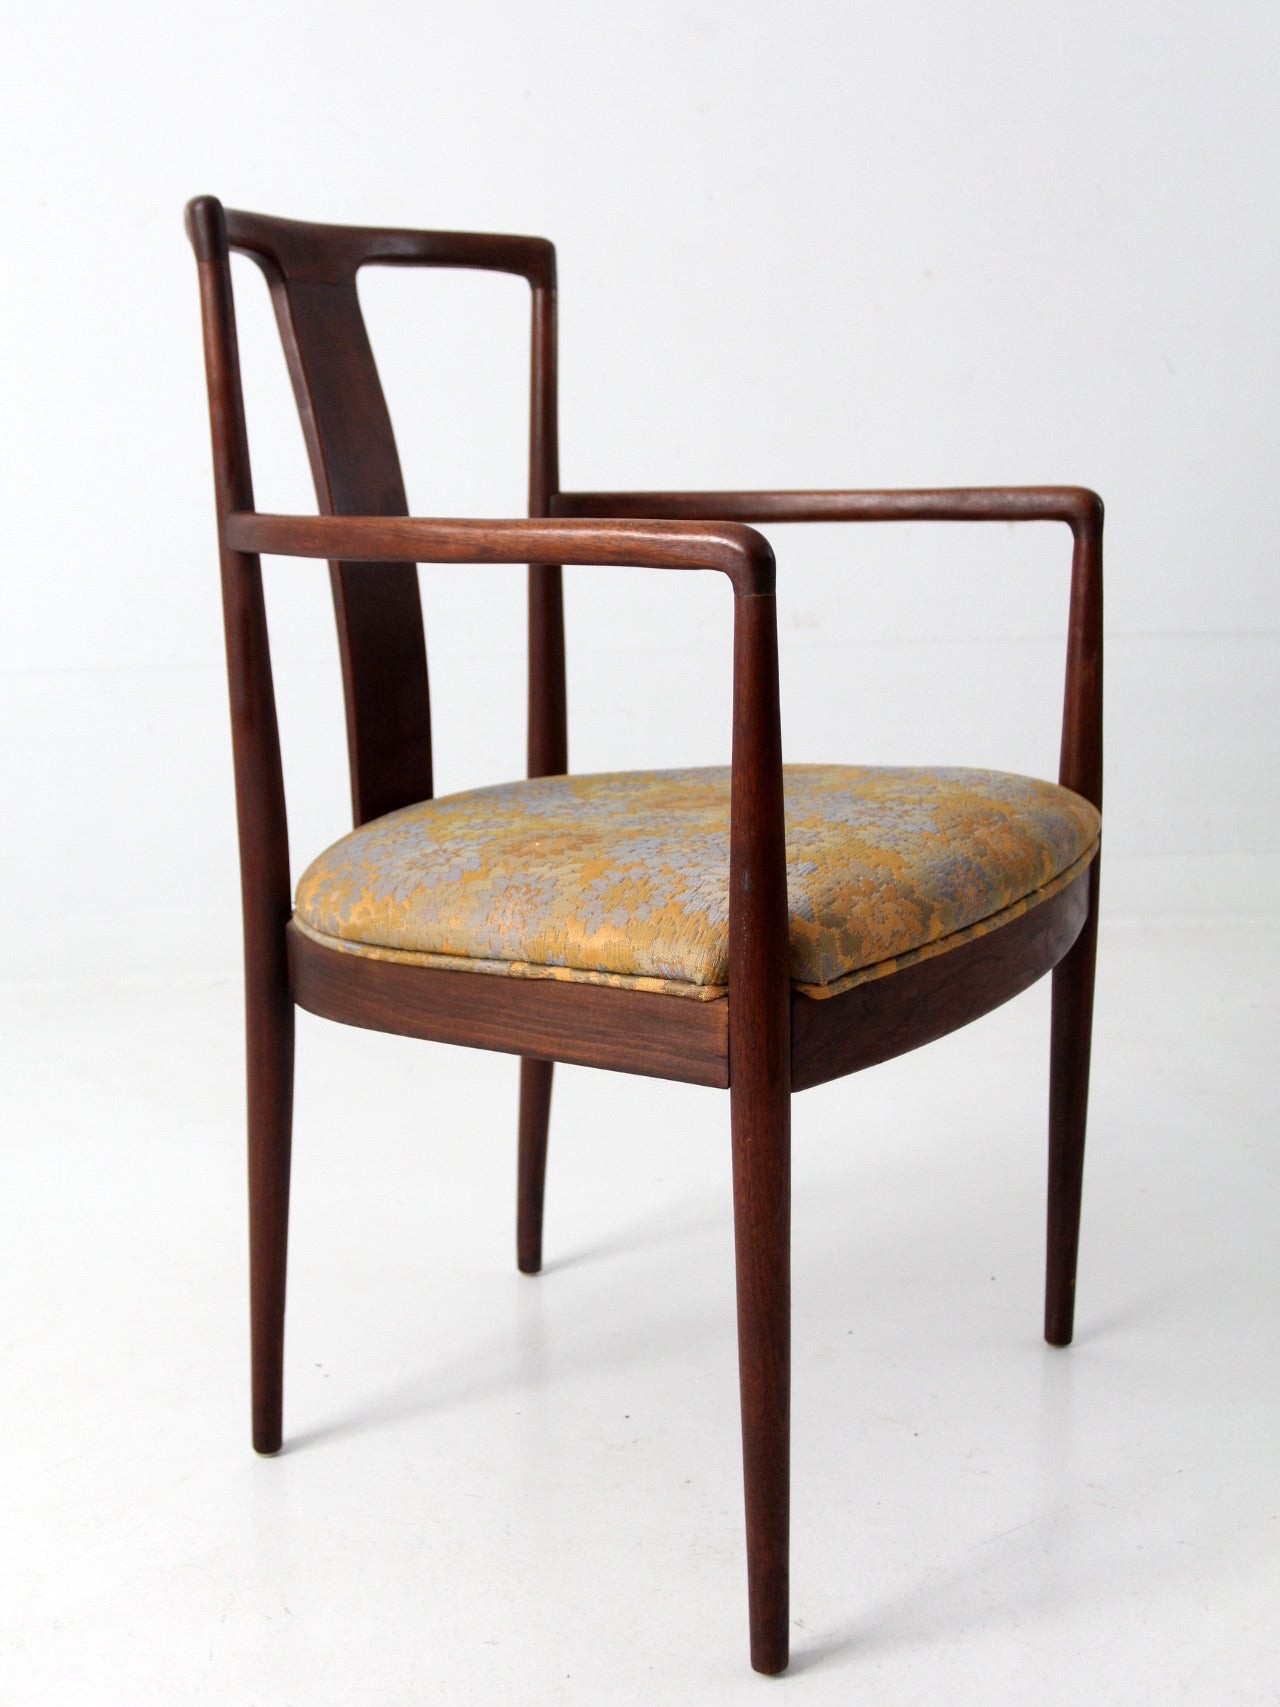 Lawrence Peabody for Nemschoff chair ca 1960s